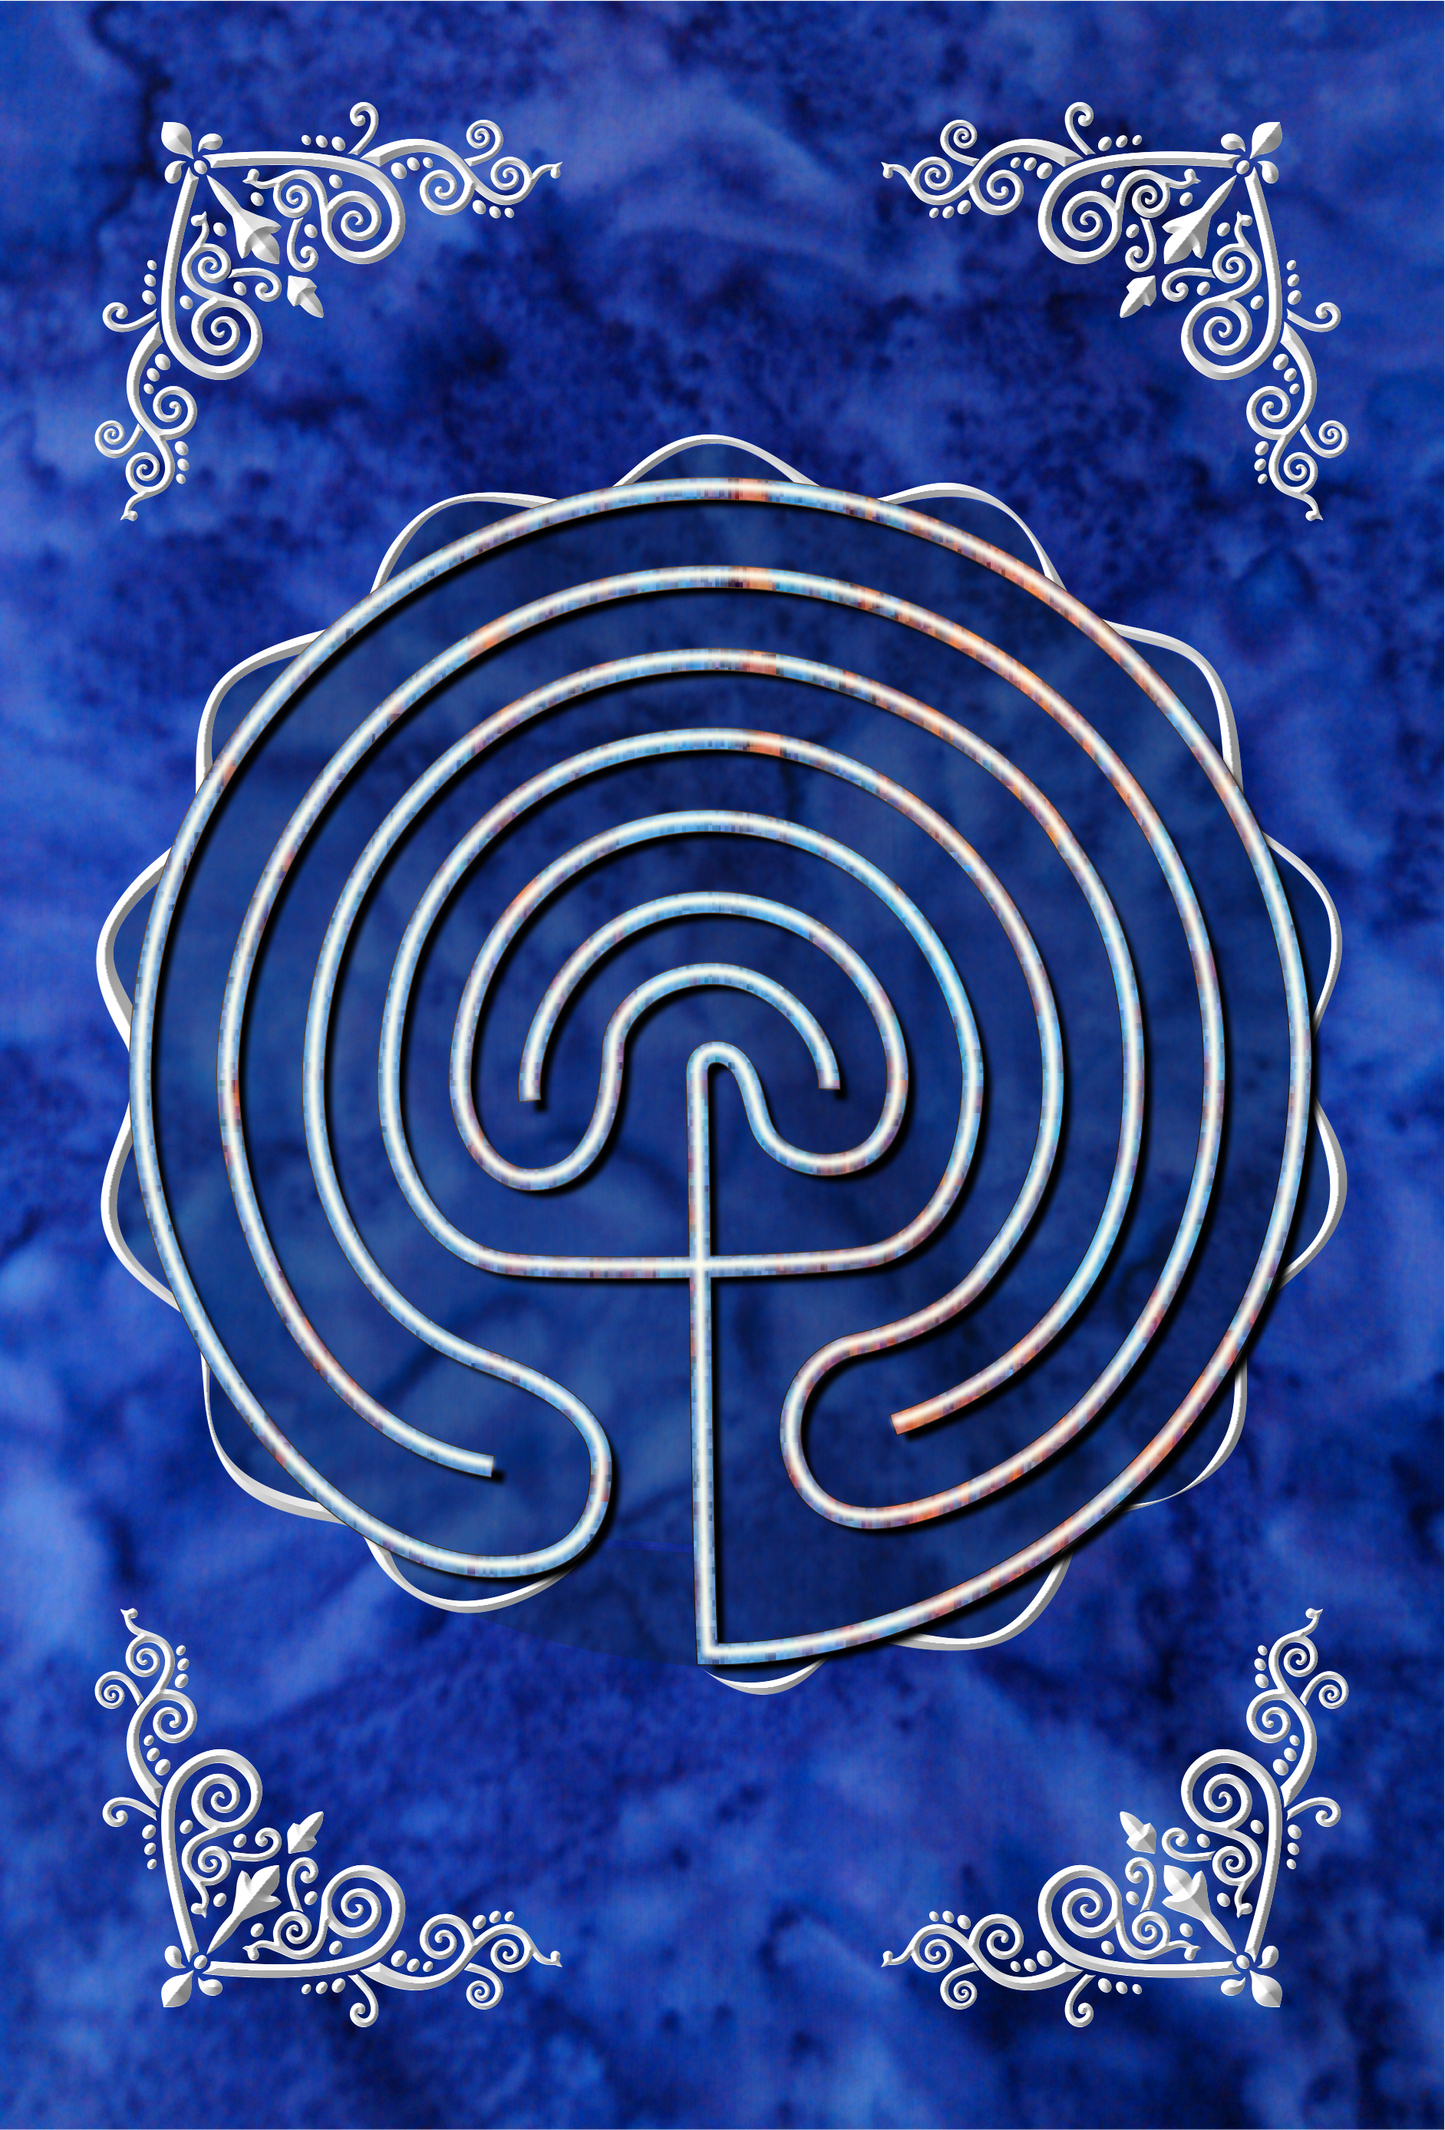 Meis Galicia - Classic - Labyrinth Mindful Tracing Art Journal - Blue Cotton